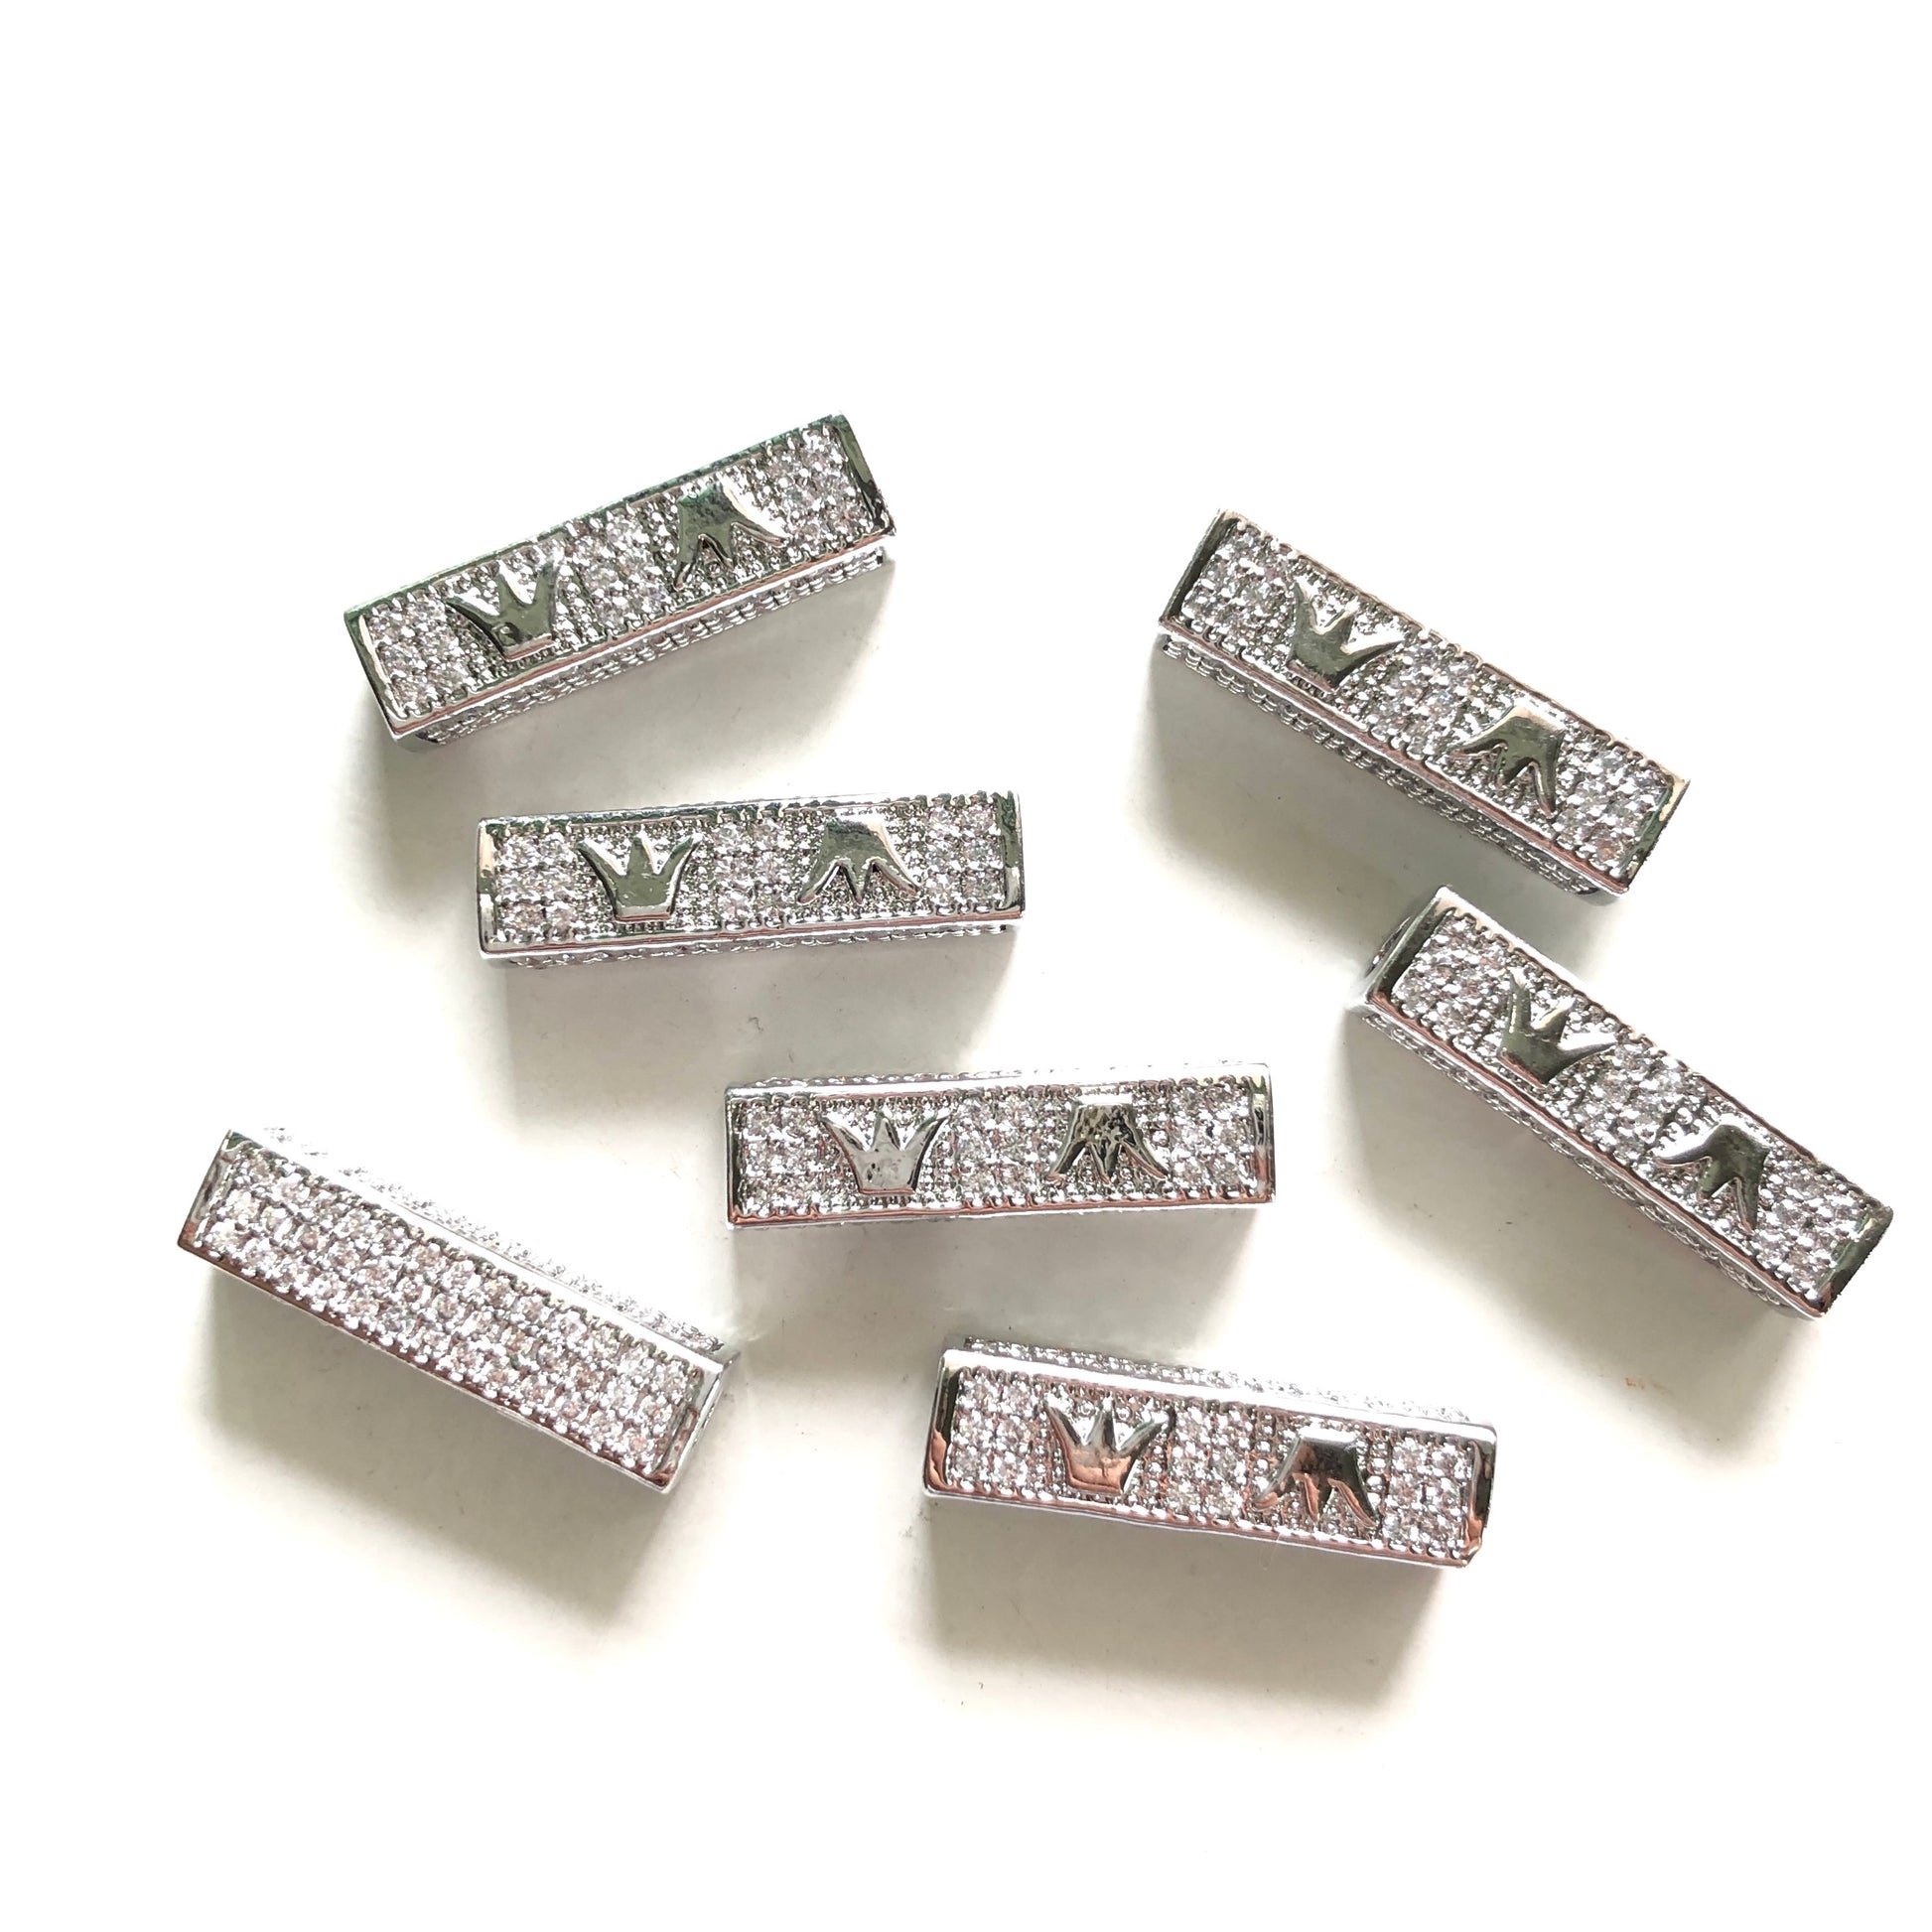 10-20pcs/lot 21*6mm CZ Paved Crown Centerpiece Spacers Silver CZ Paved Spacers Cuboid Spacers Charms Beads Beyond